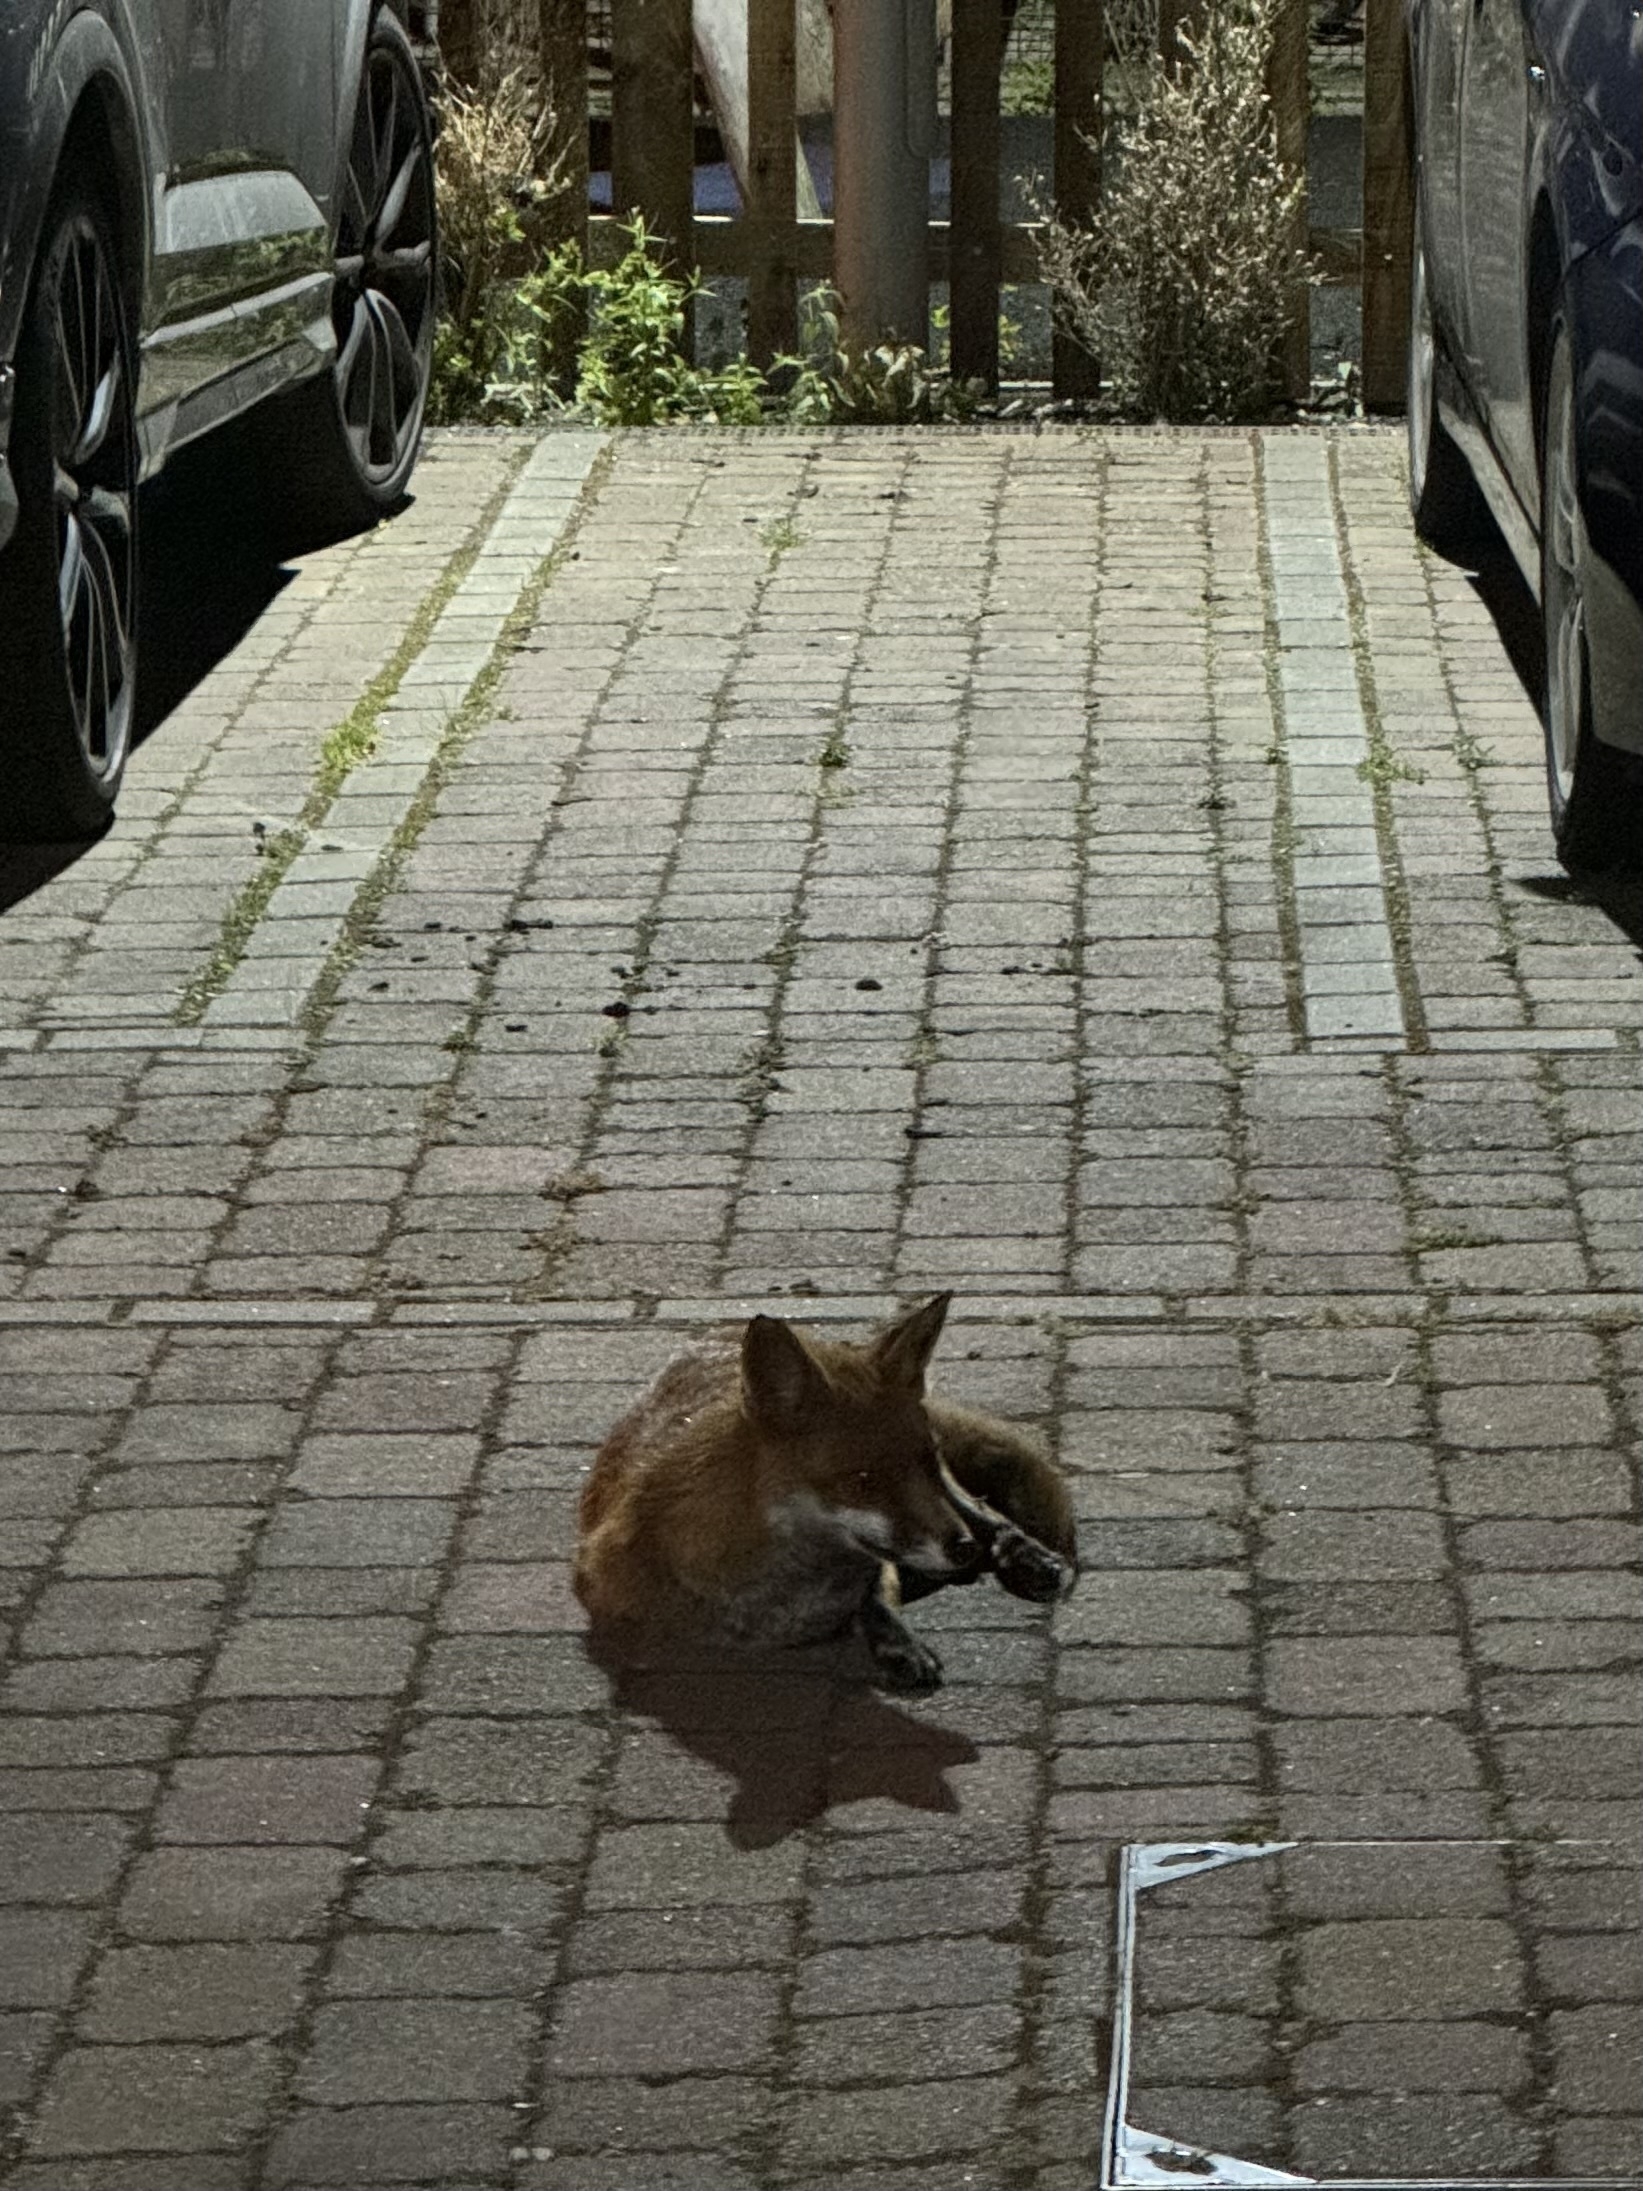 A fox resting on the ground between two cars.